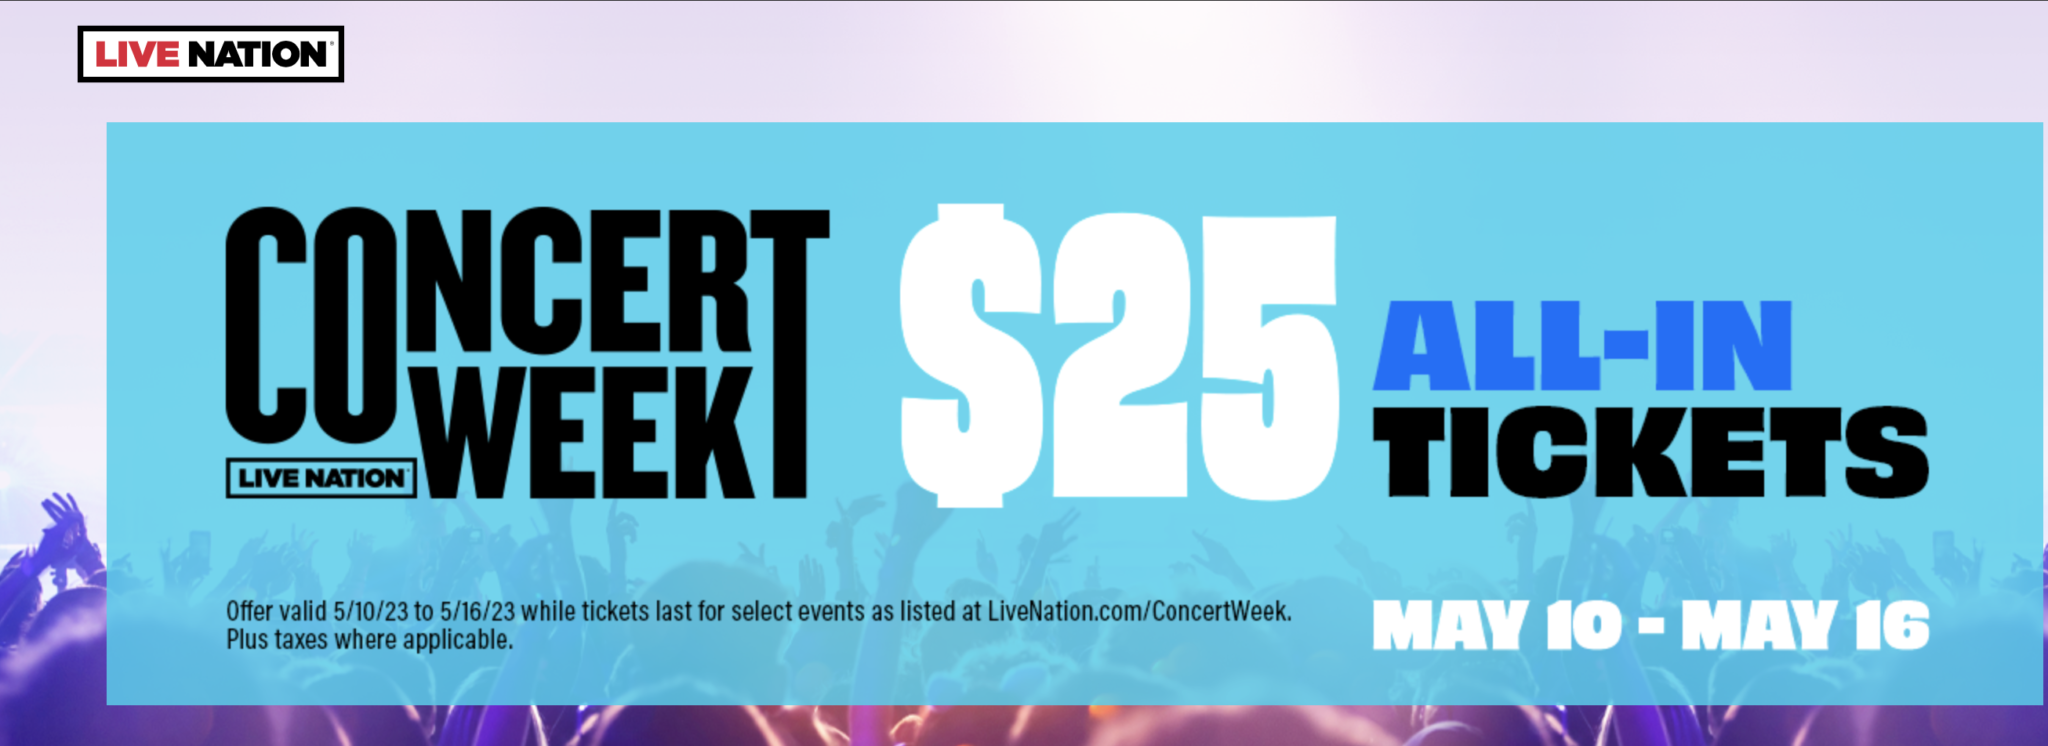 Get 25 Tickets During Concert Week The Mama Maven Blog